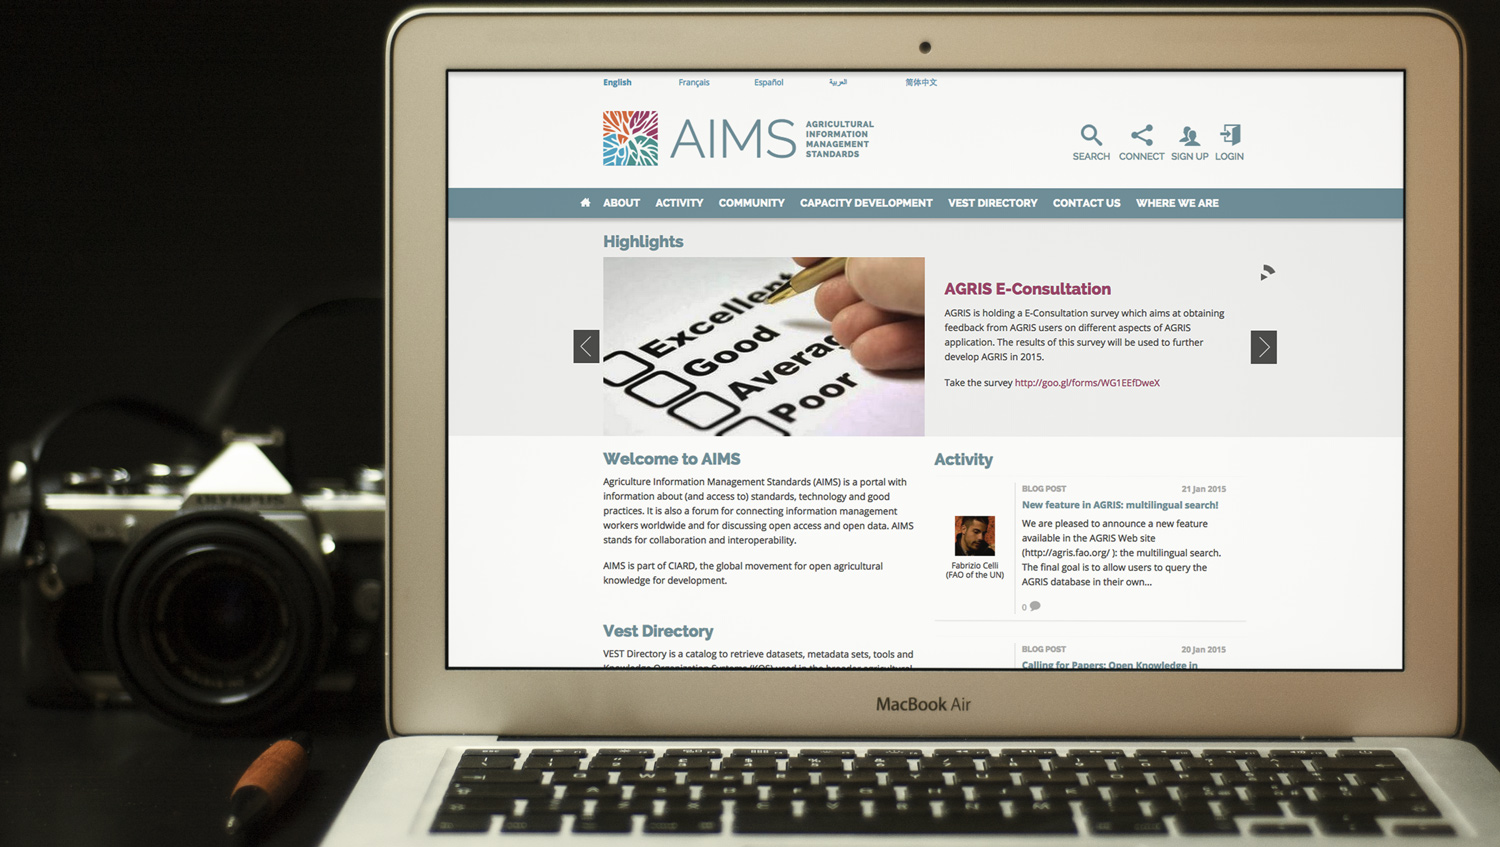 The AIMS homepage